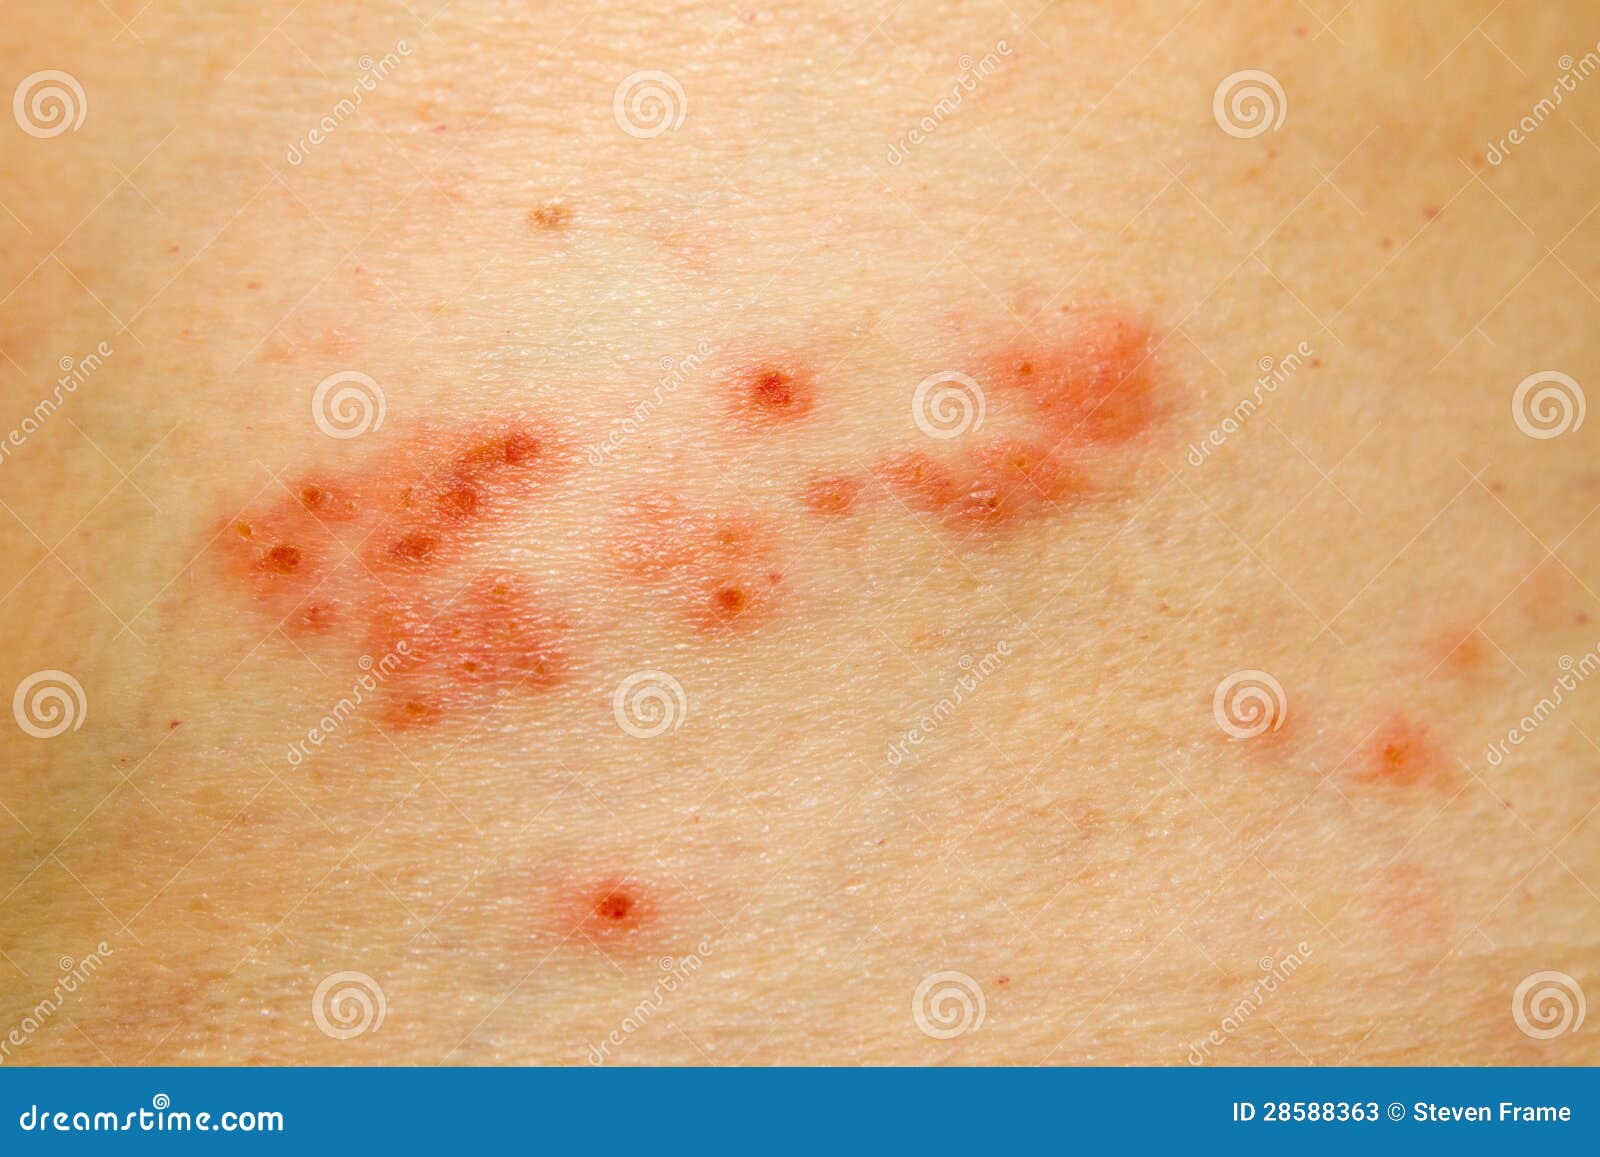 herpes on thigh pictures #10